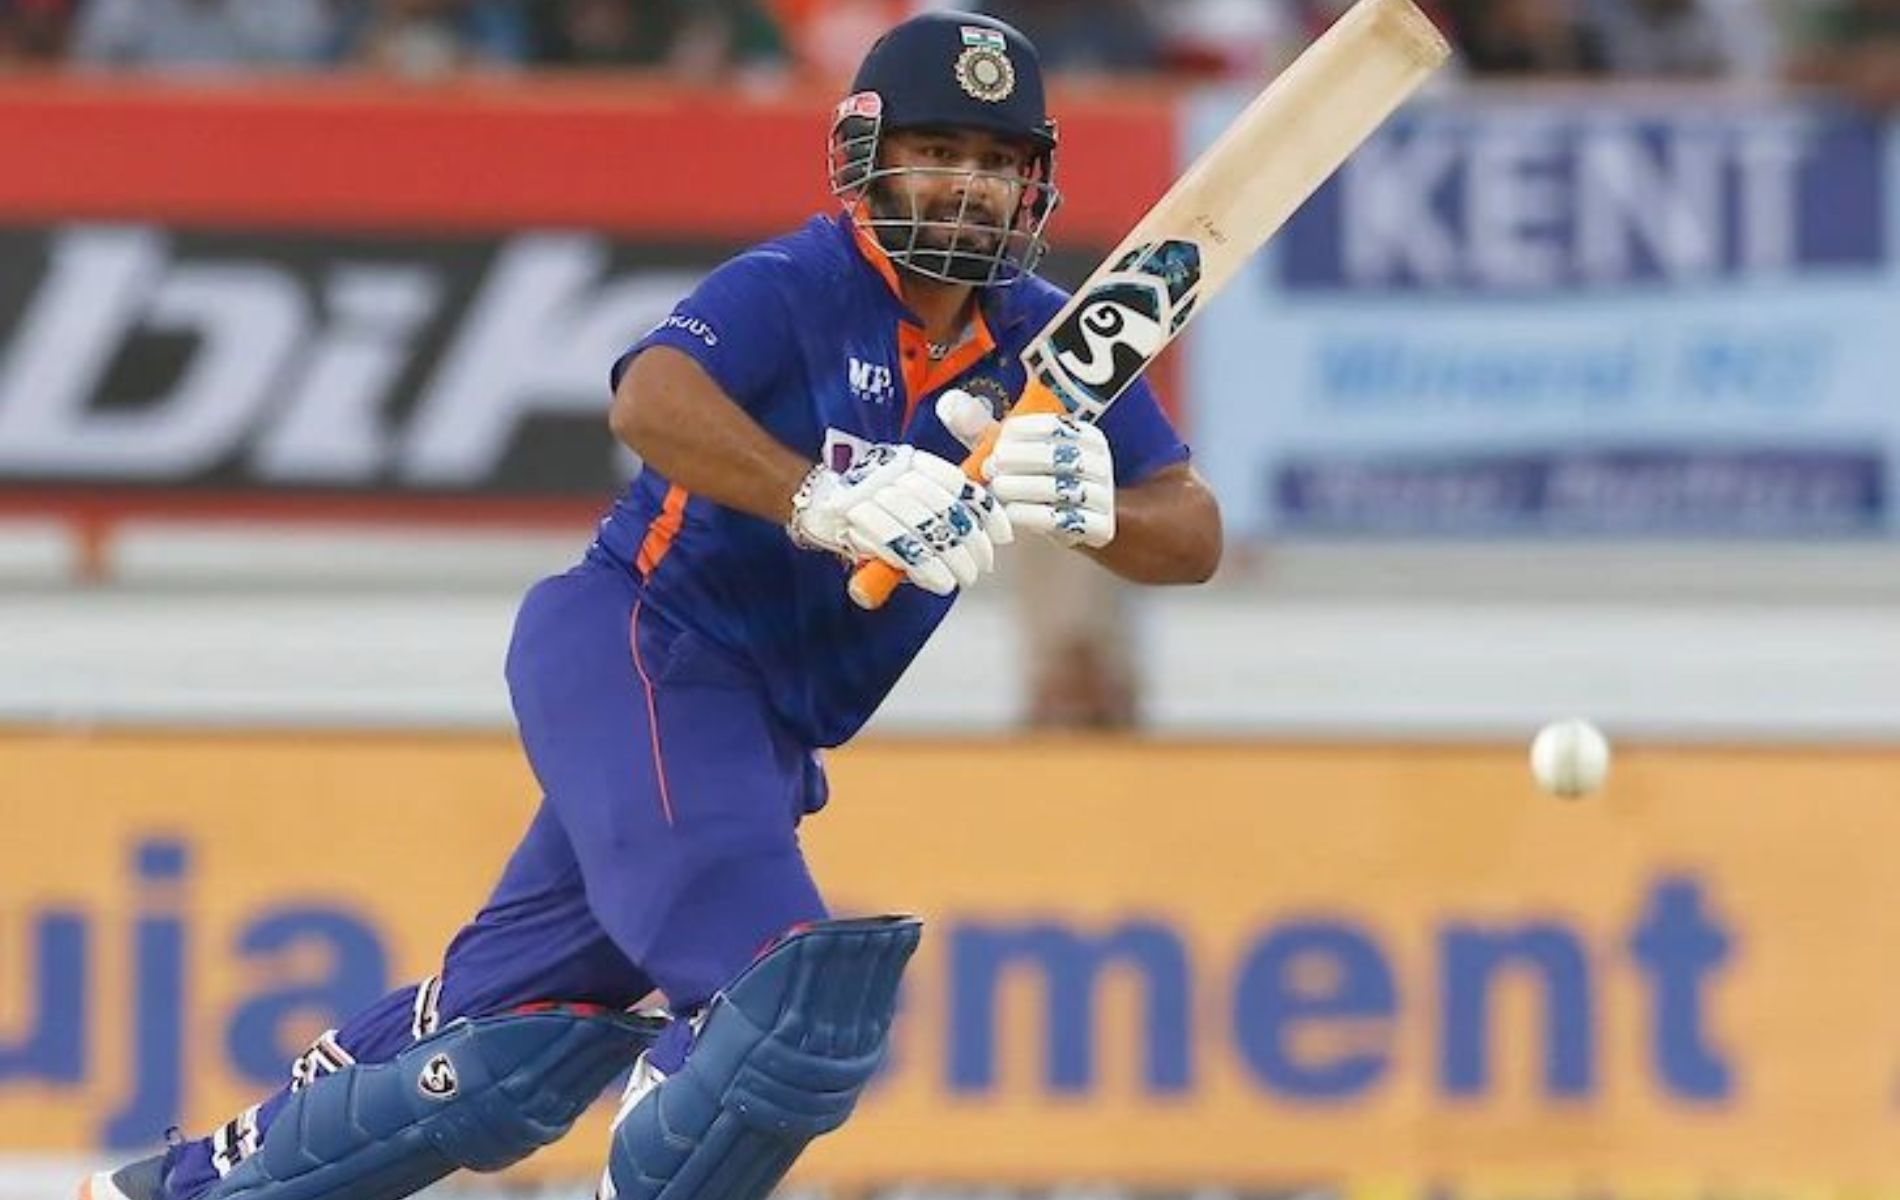 Rishabh Pant had a batting average of 14.50 in the South Africa series. (Pic: Instagram)